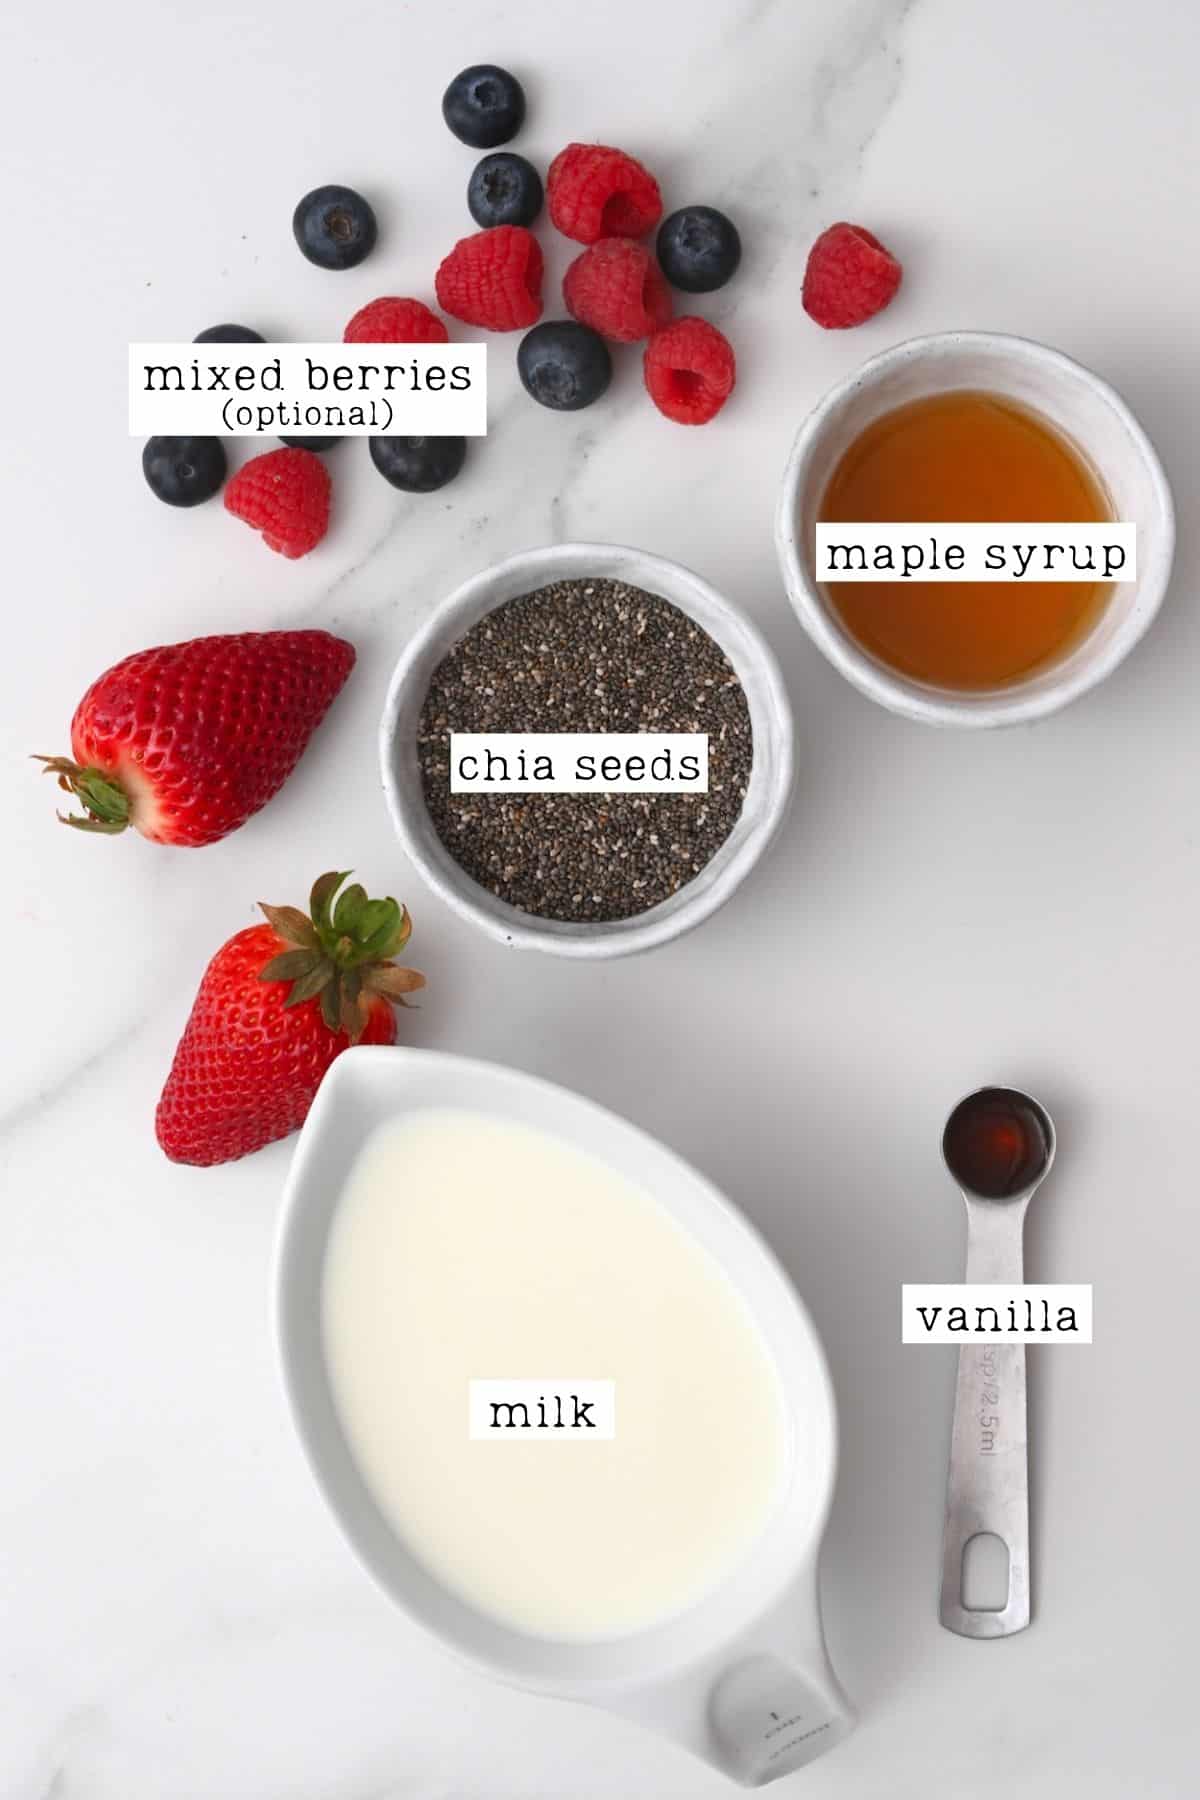 https://www.alphafoodie.com/wp-content/uploads/2022/03/How-to-Make-Chia-Pudding-Ingredients-for-chia-seeds.jpeg